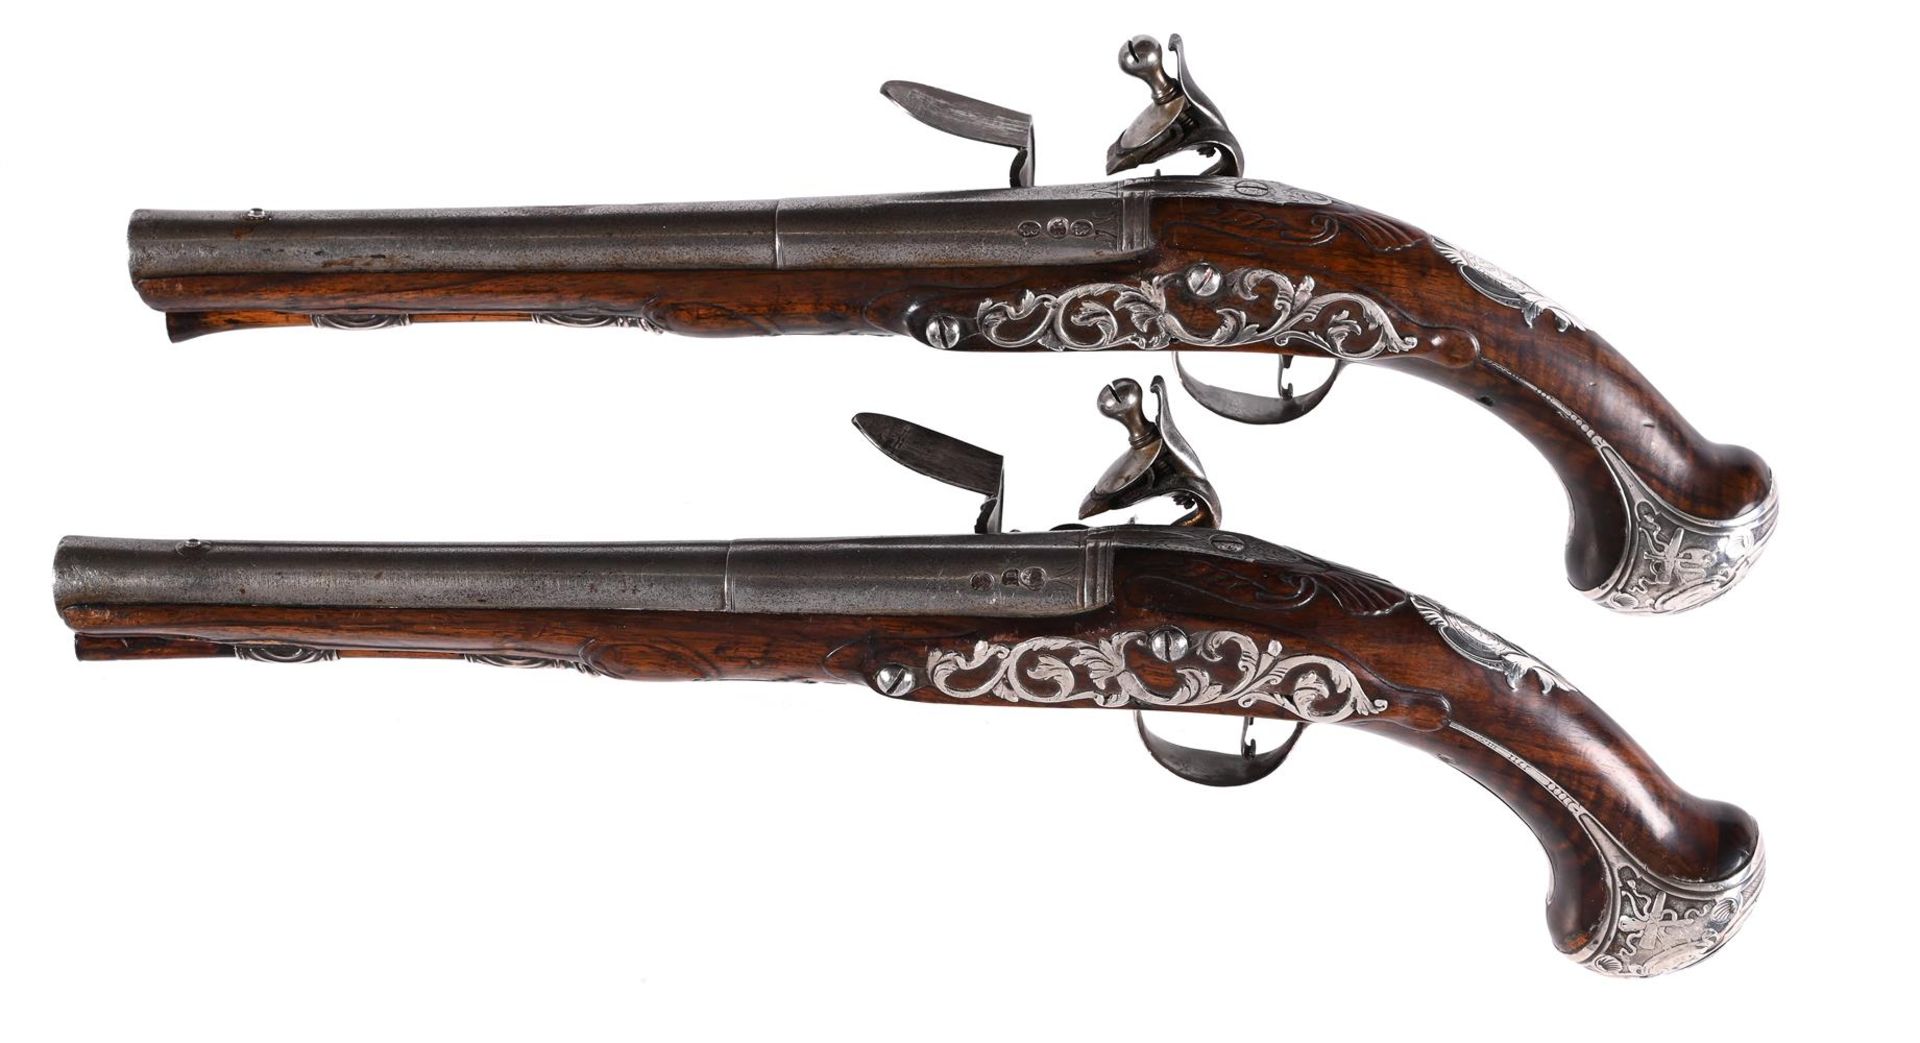 BENNETT LONDON; A PAIR OF WALNUT AND SILVER-METAL MOUNTED HOLSTER PISTOLS - Image 4 of 8